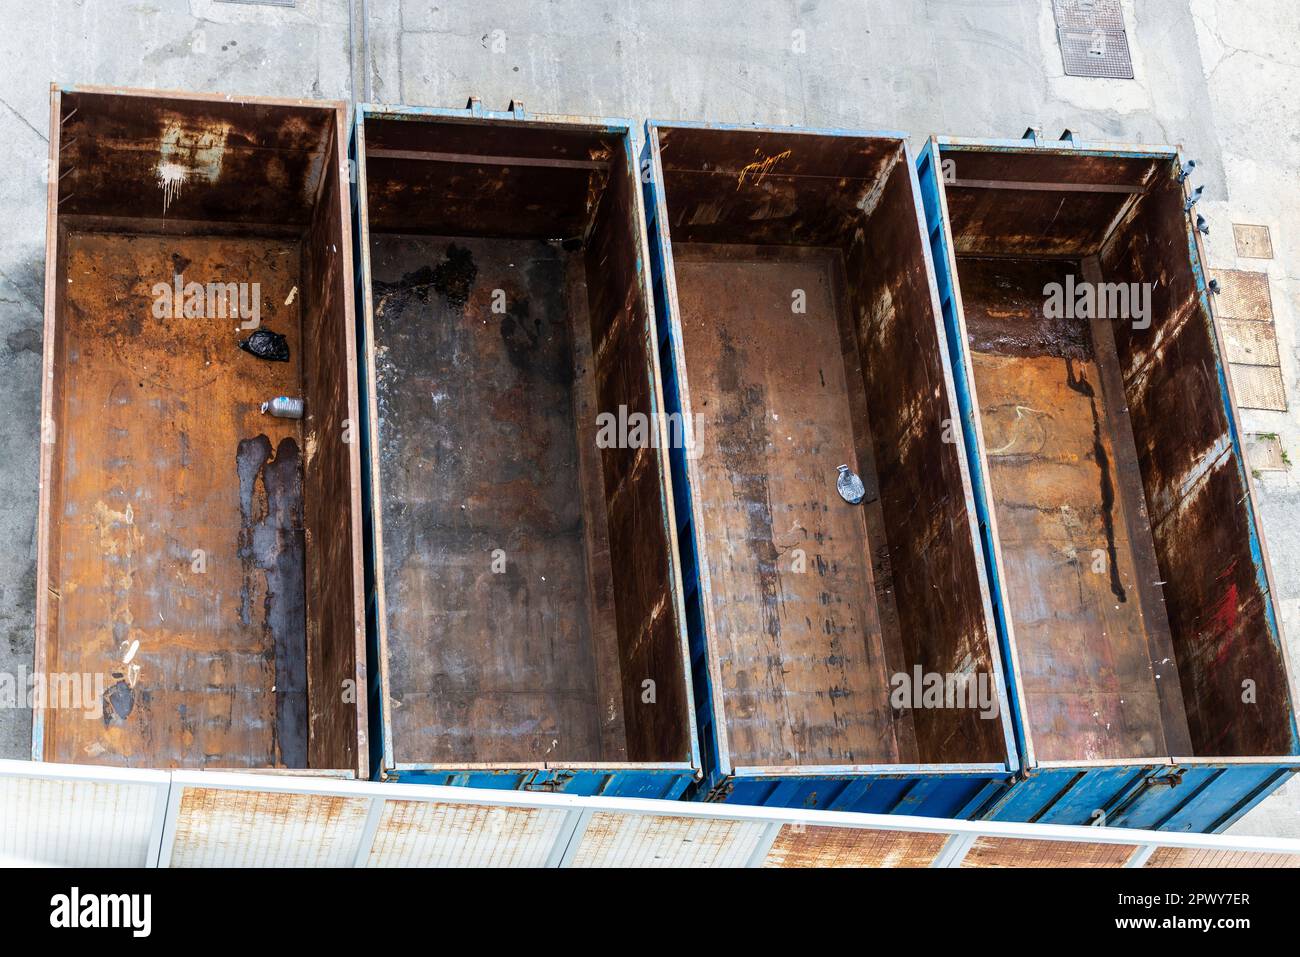 Overview of four old rusty containers as abstract background Stock Photo